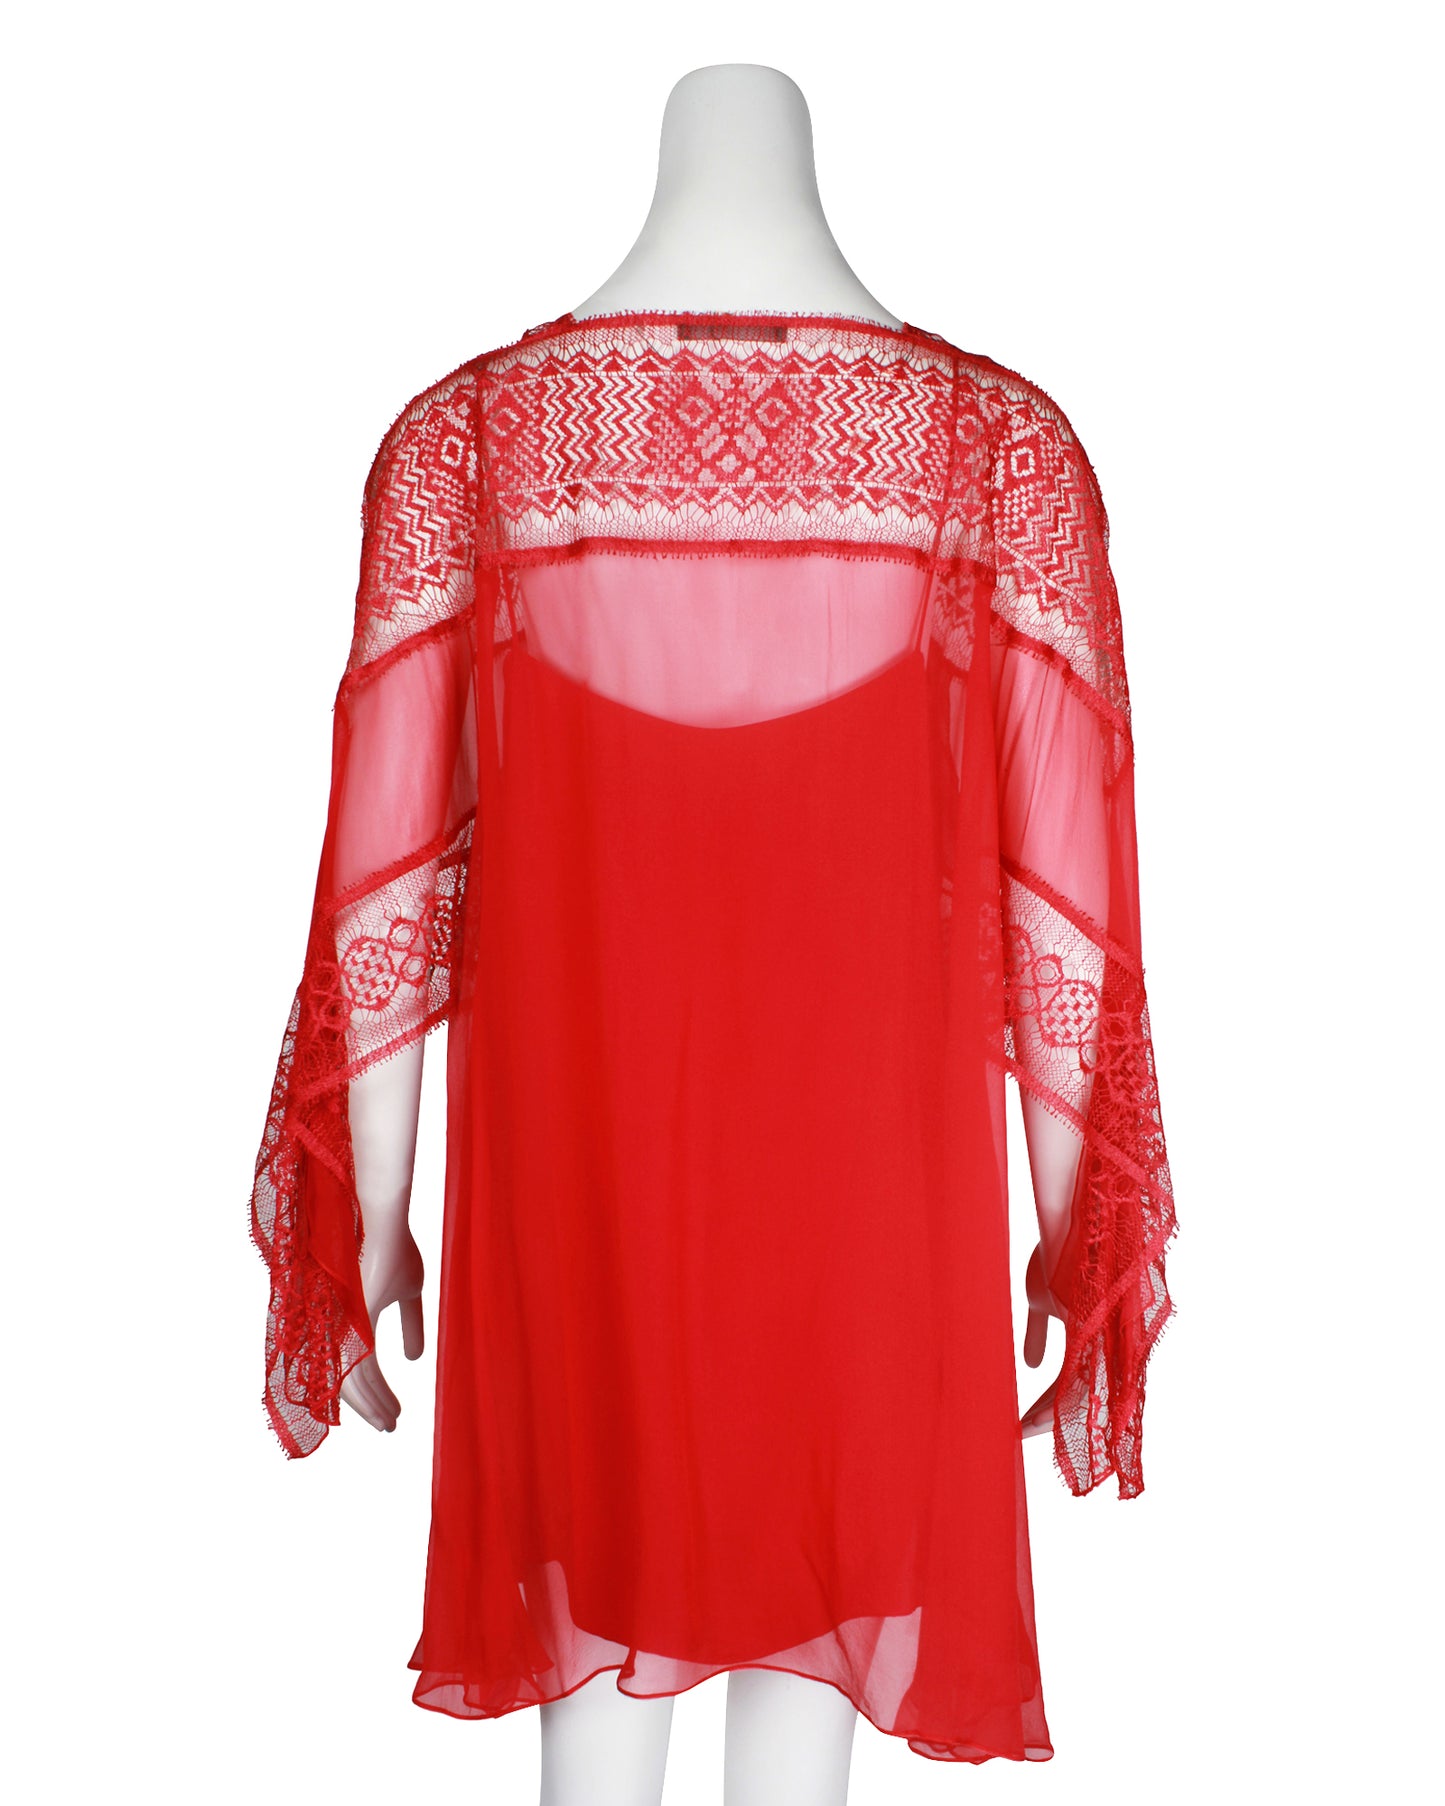 Alberta Ferretti Red Lace Transparent Shirt With Camisole